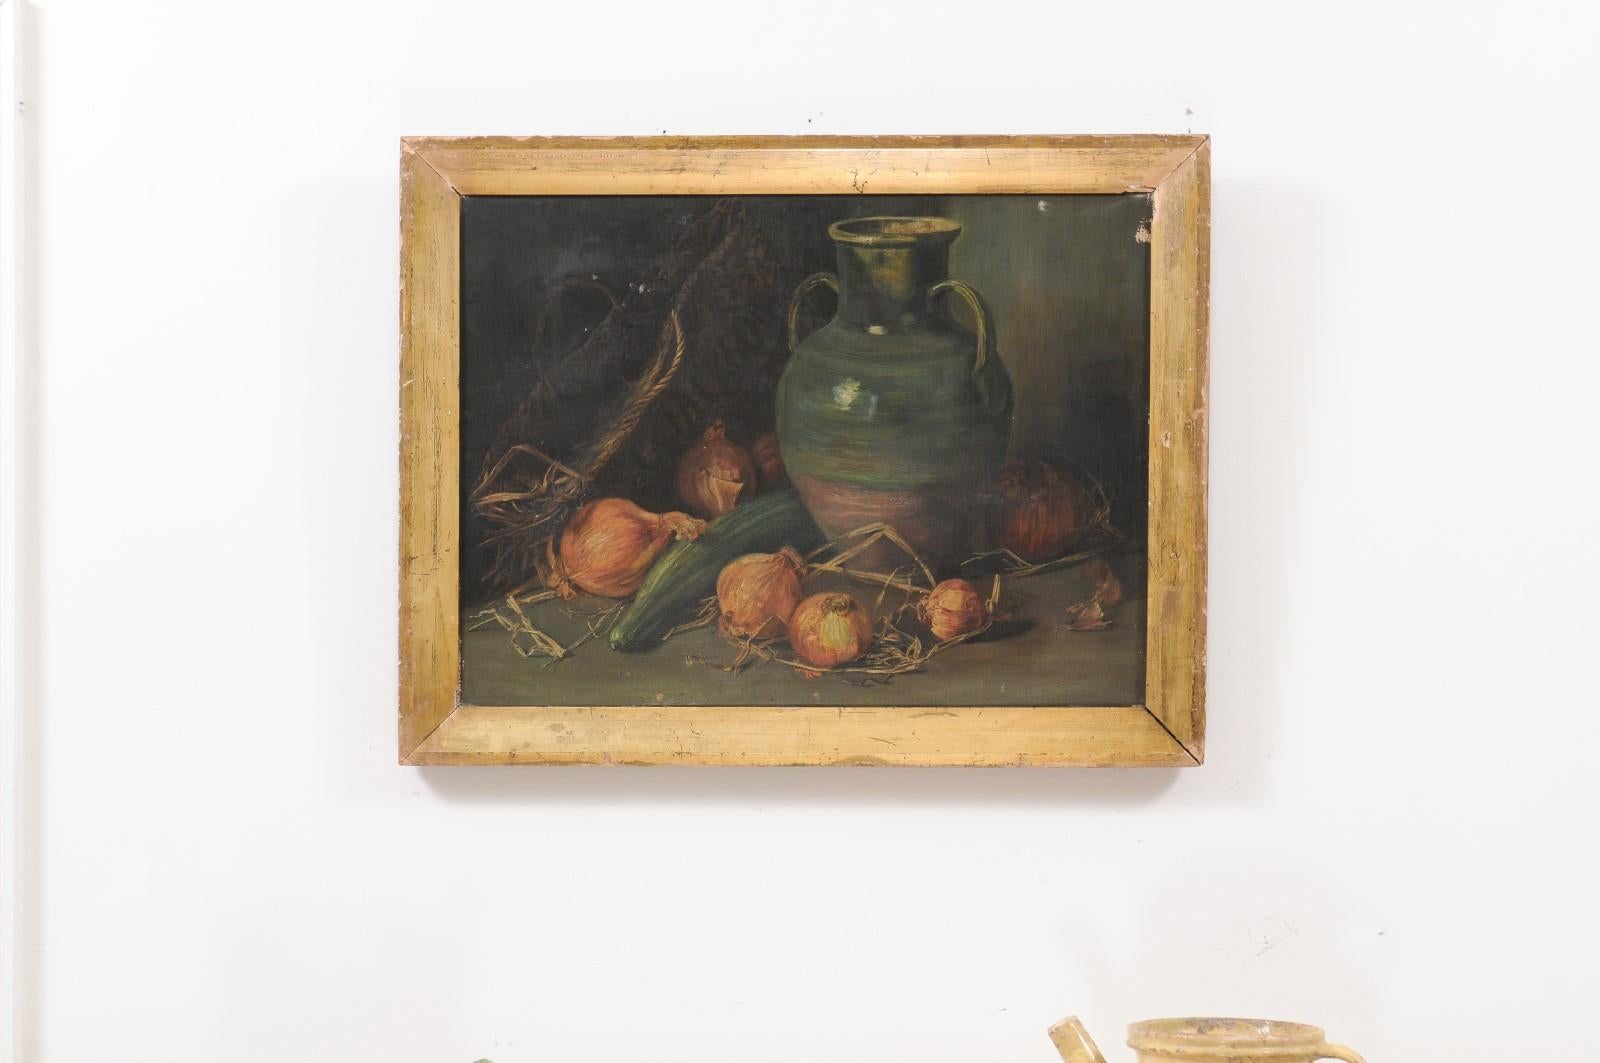 An English framed oil on canvas still-life painting from the mid 19th century by George Jackson. Created in England during the third quarter of the 19th century, this George Jackson oil on canvas depicts a Southern French green glazed jar surrounded